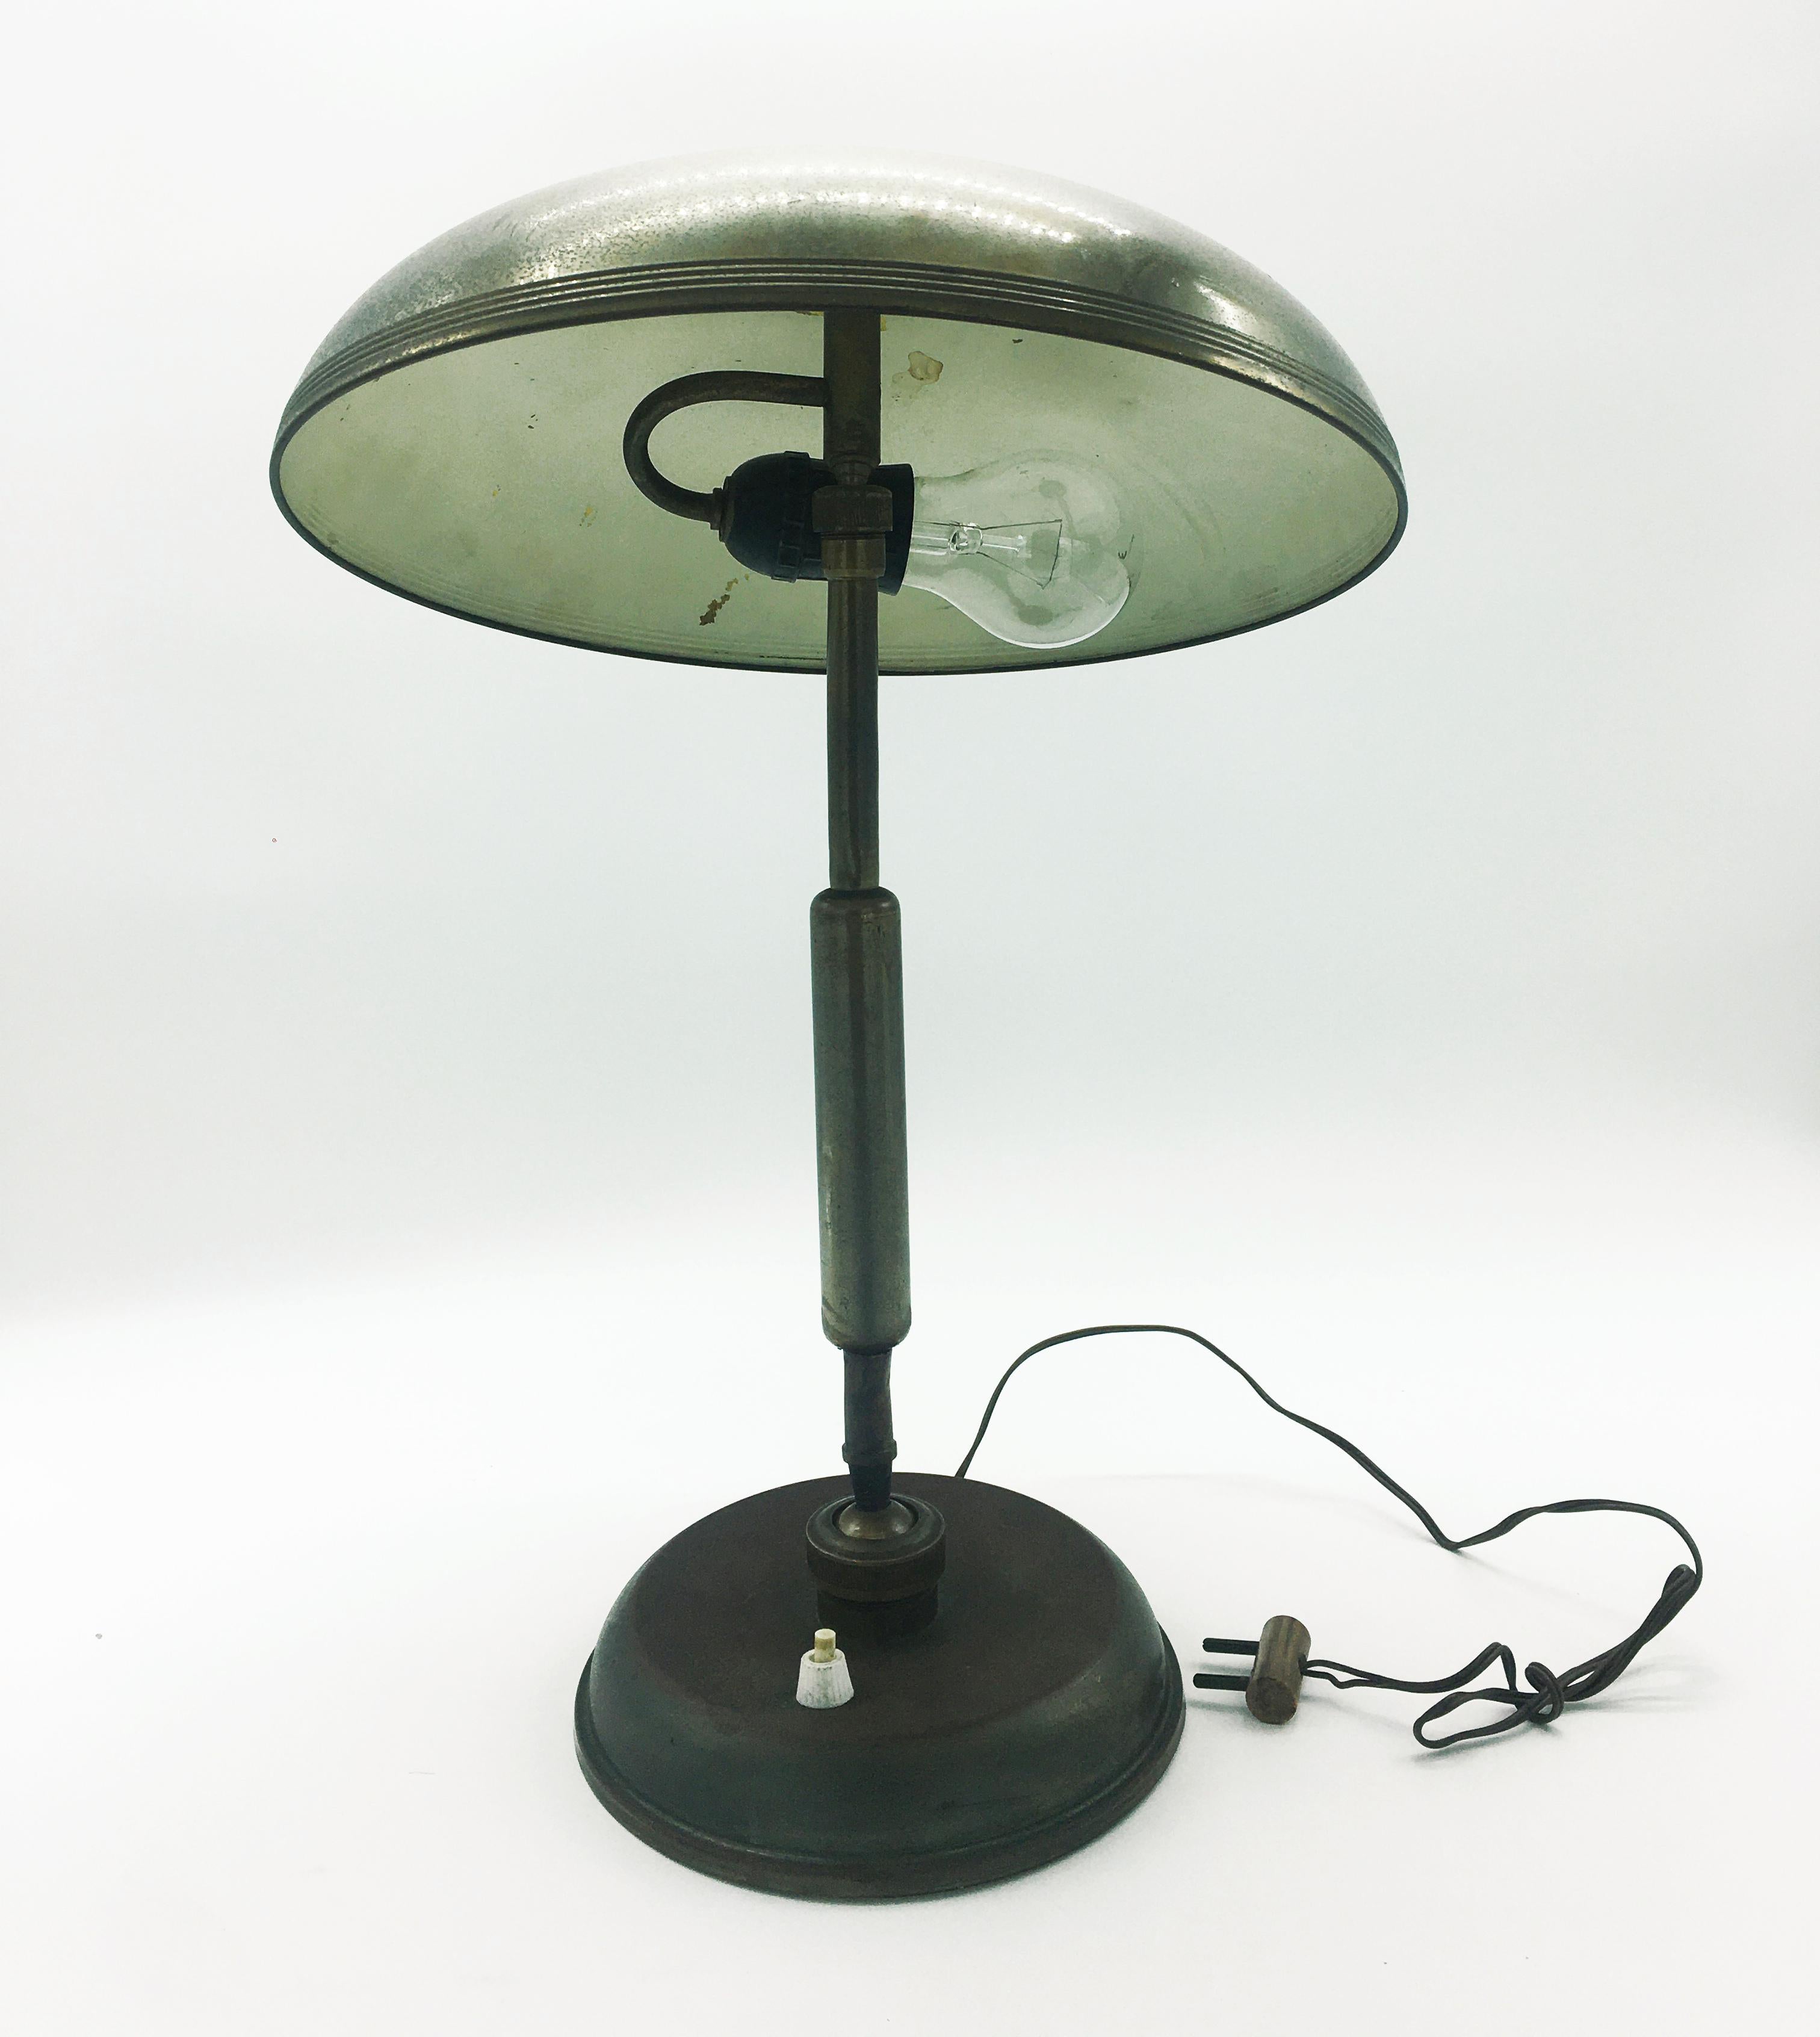 Pre-war Italian brass desk lamp, circa 1940s. A classic desk lamp which combines the characteristics of the Art Deco and Art Nouveau movements. A Lariolux ministeriale rounded shade tops an adjustable brass support stem. The brass features a